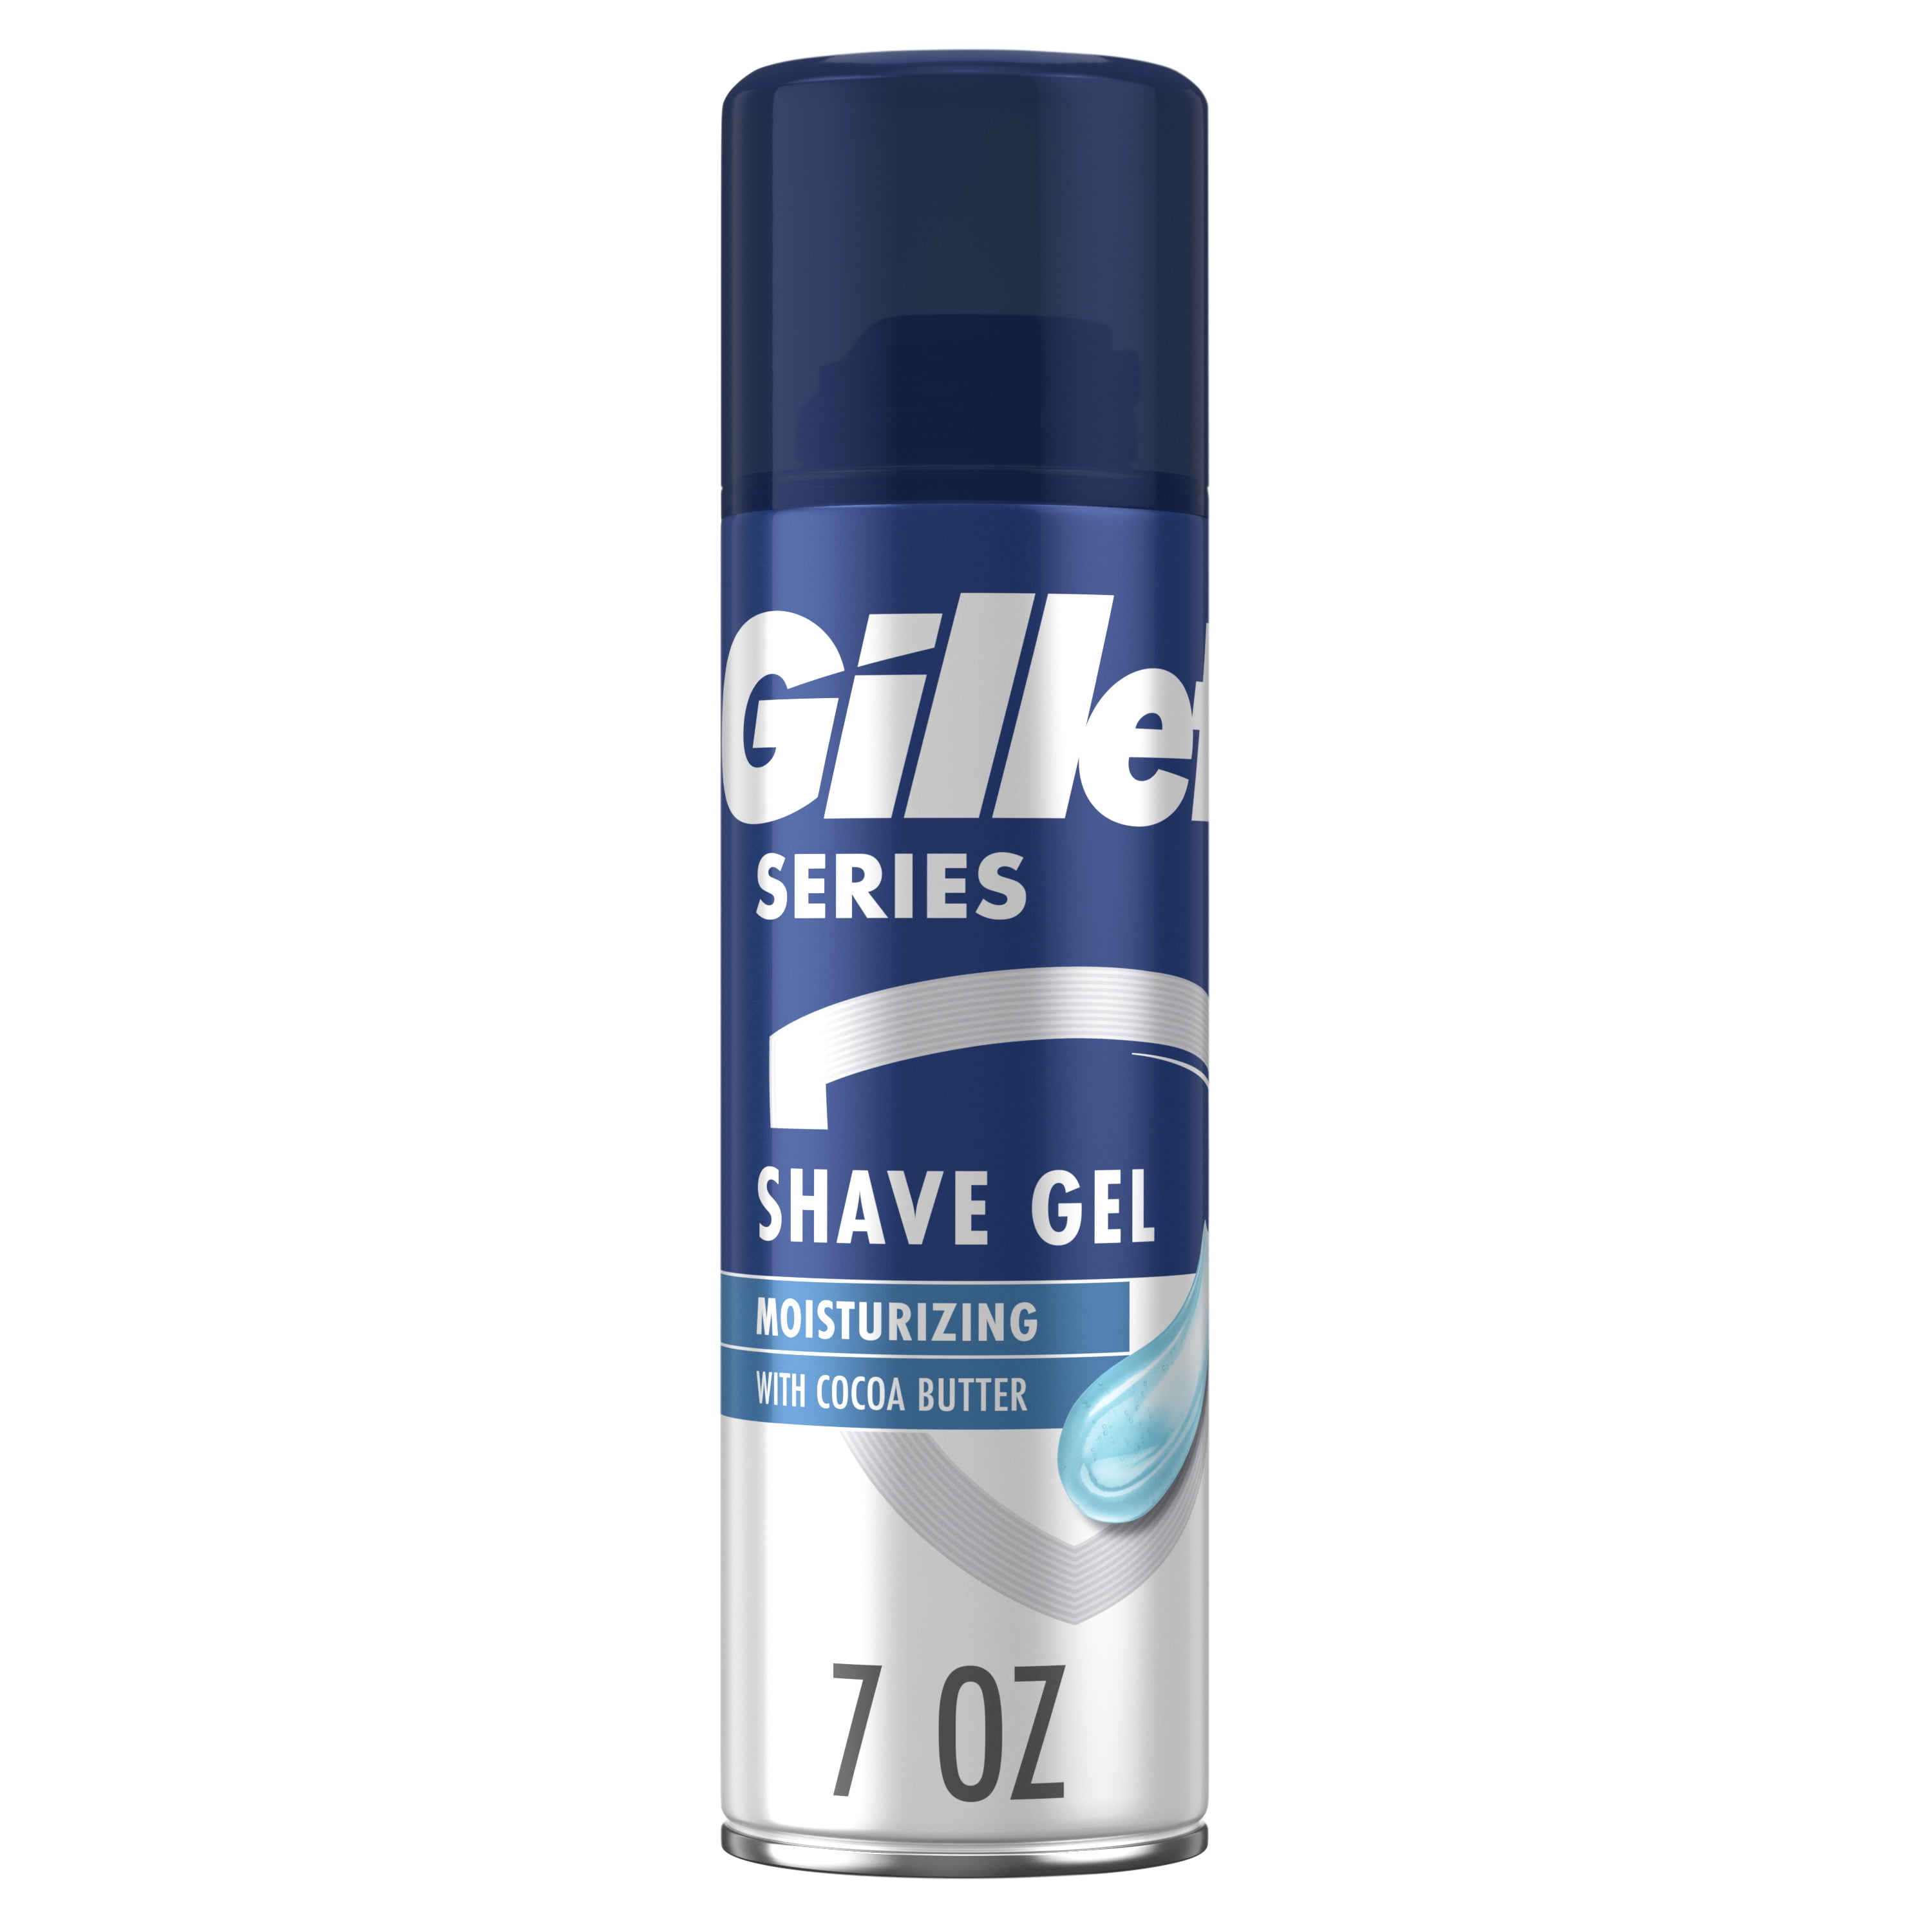 Gillette Series Moisturizing Shave Gel for Men with Cocoa Butter, 7oz